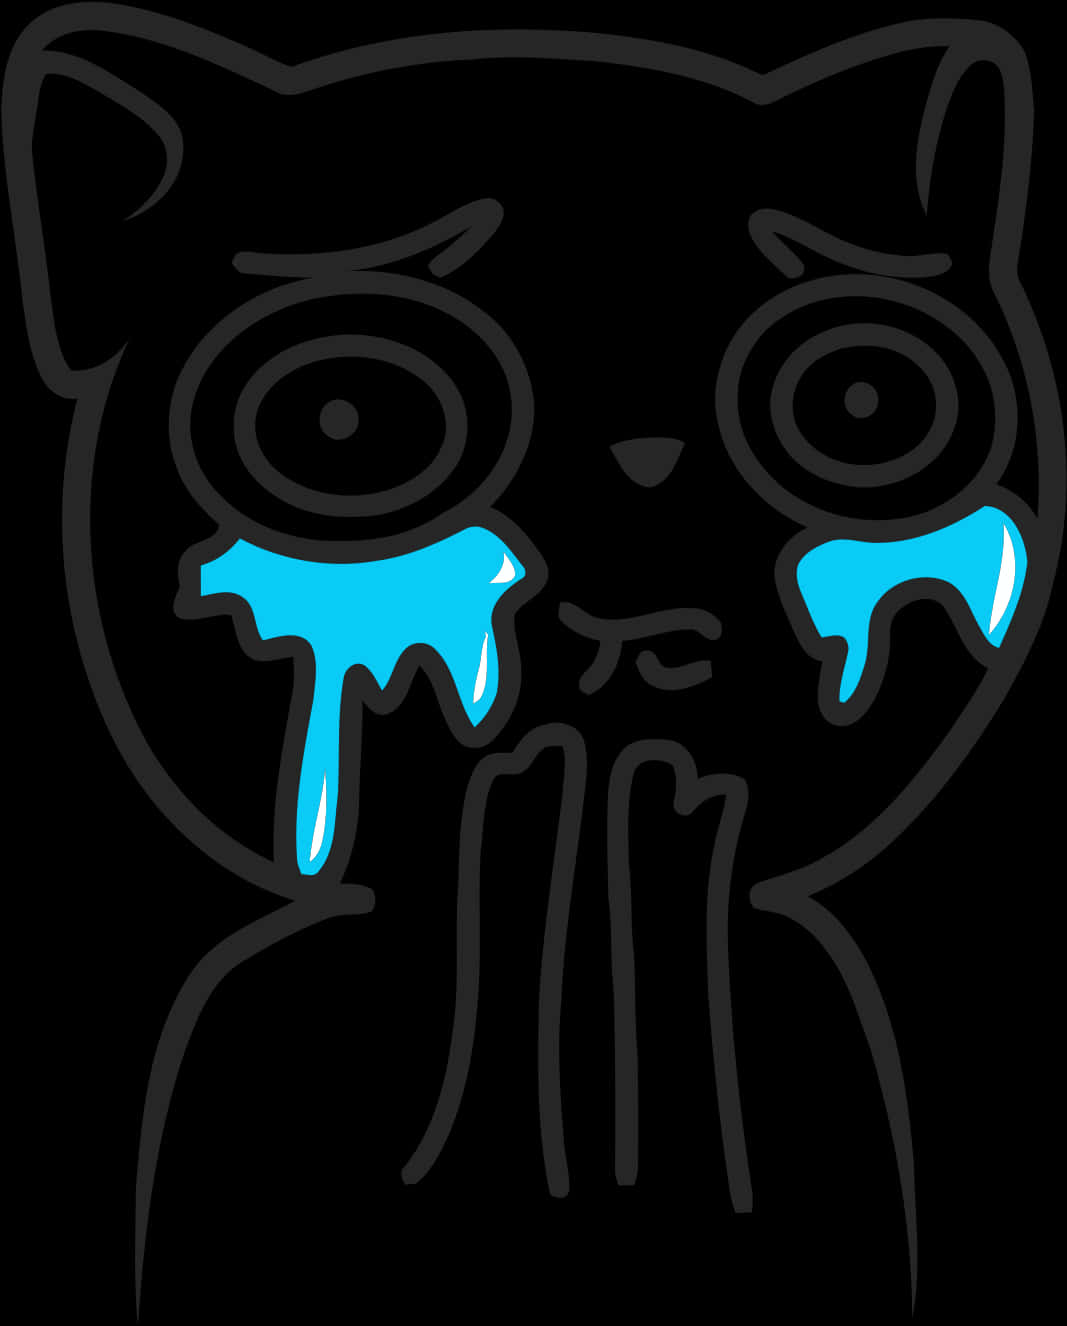 Crying Cat Meme Face Vector PNG image